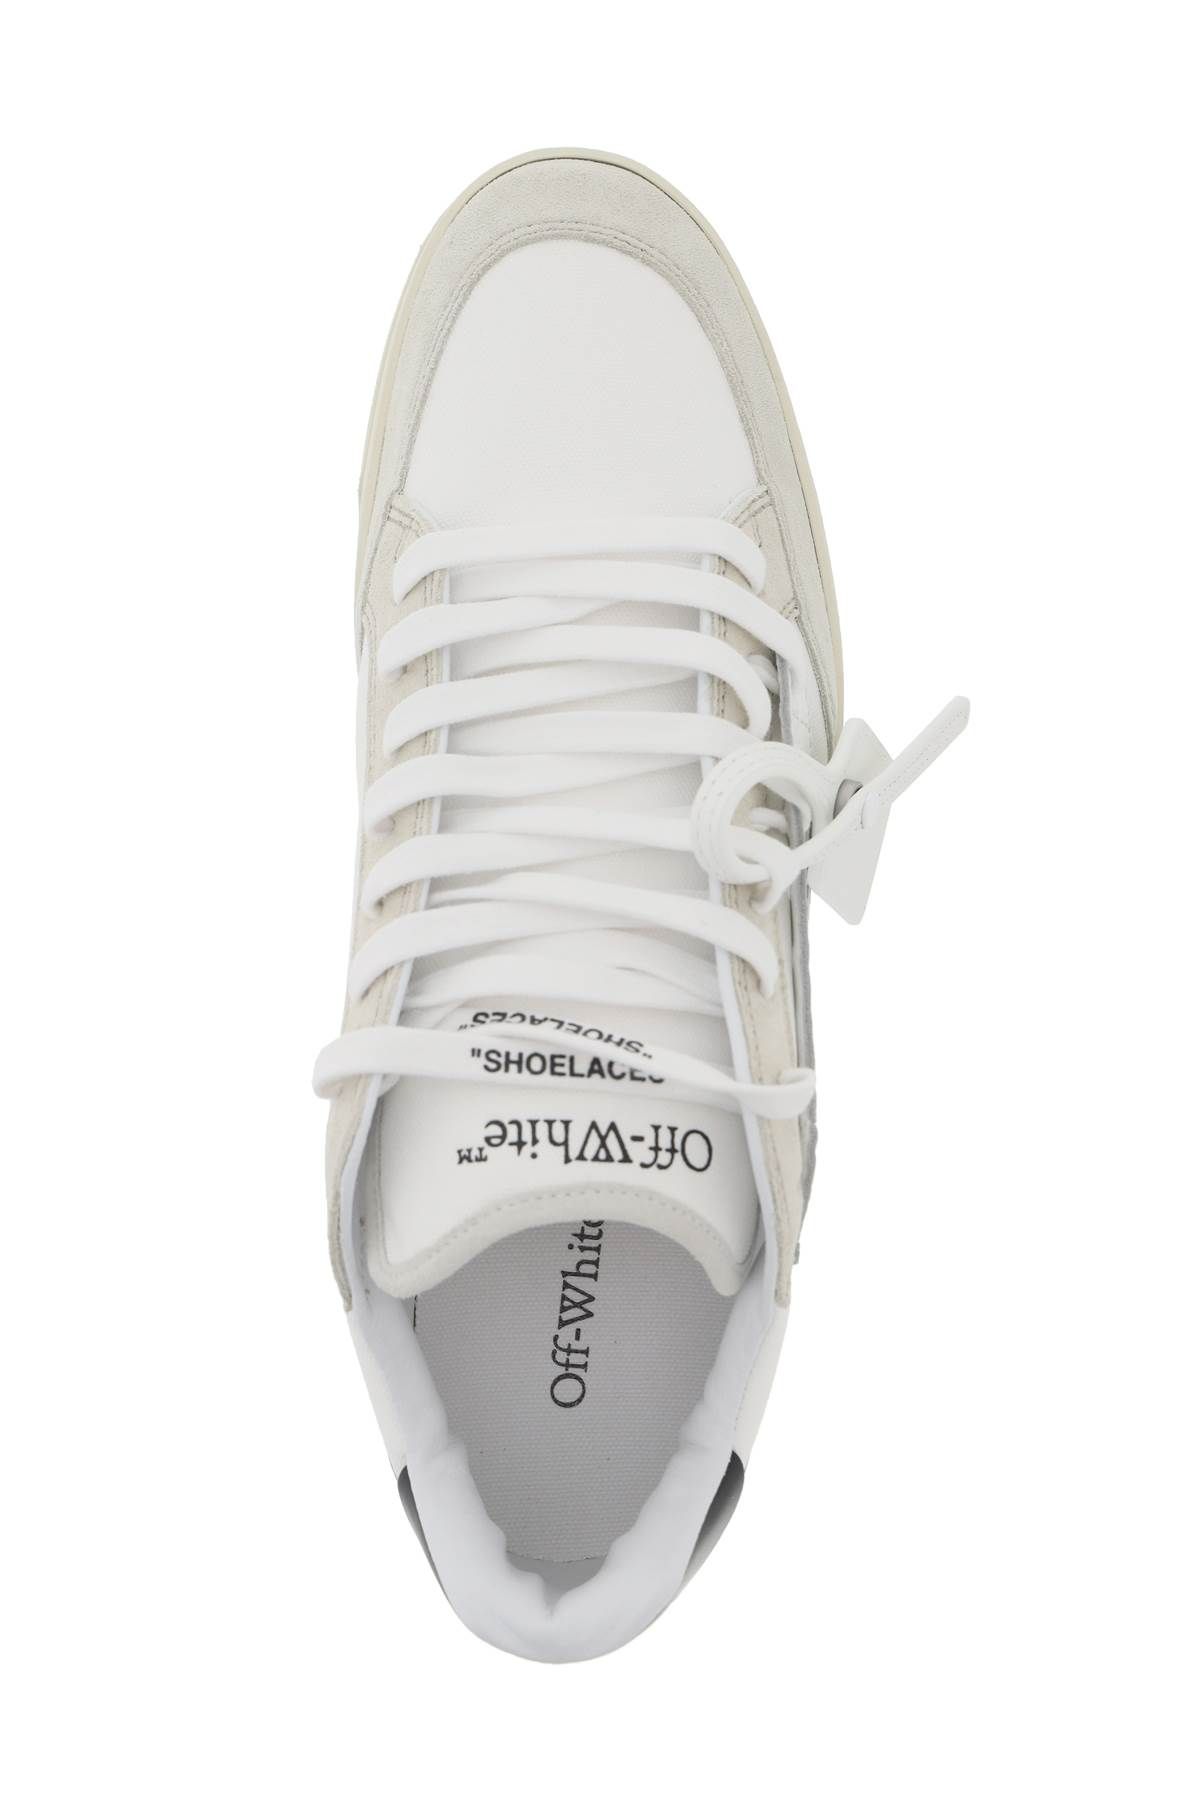 Shop Off-white 5.0 Sneakers In White,beige